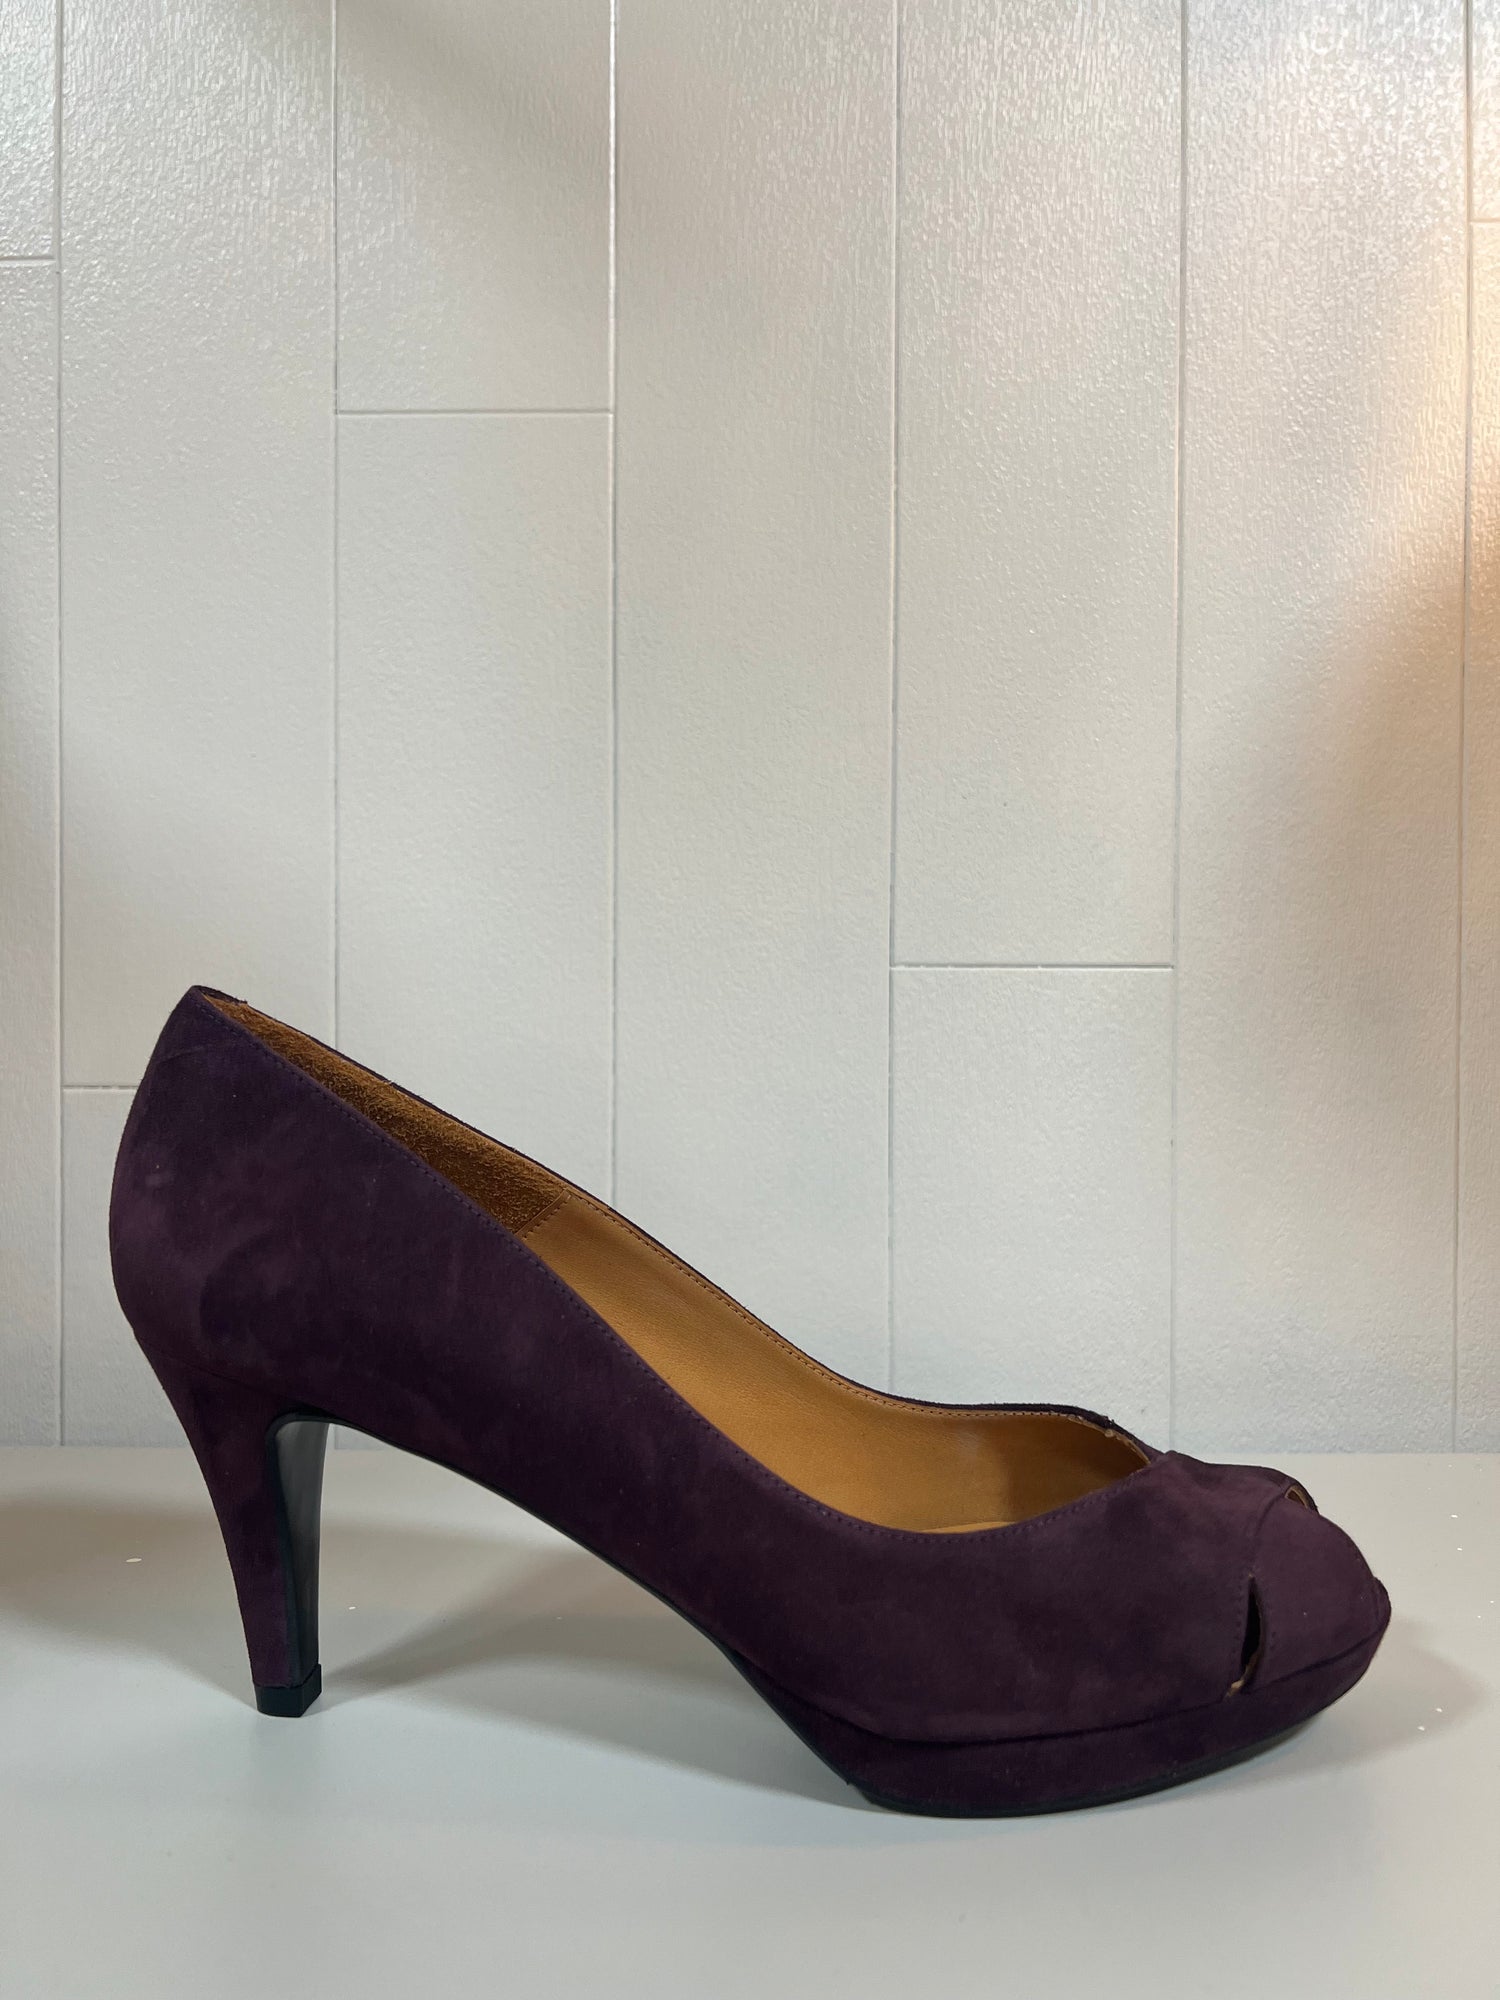 Shoe With Open Toe - Plum Suede